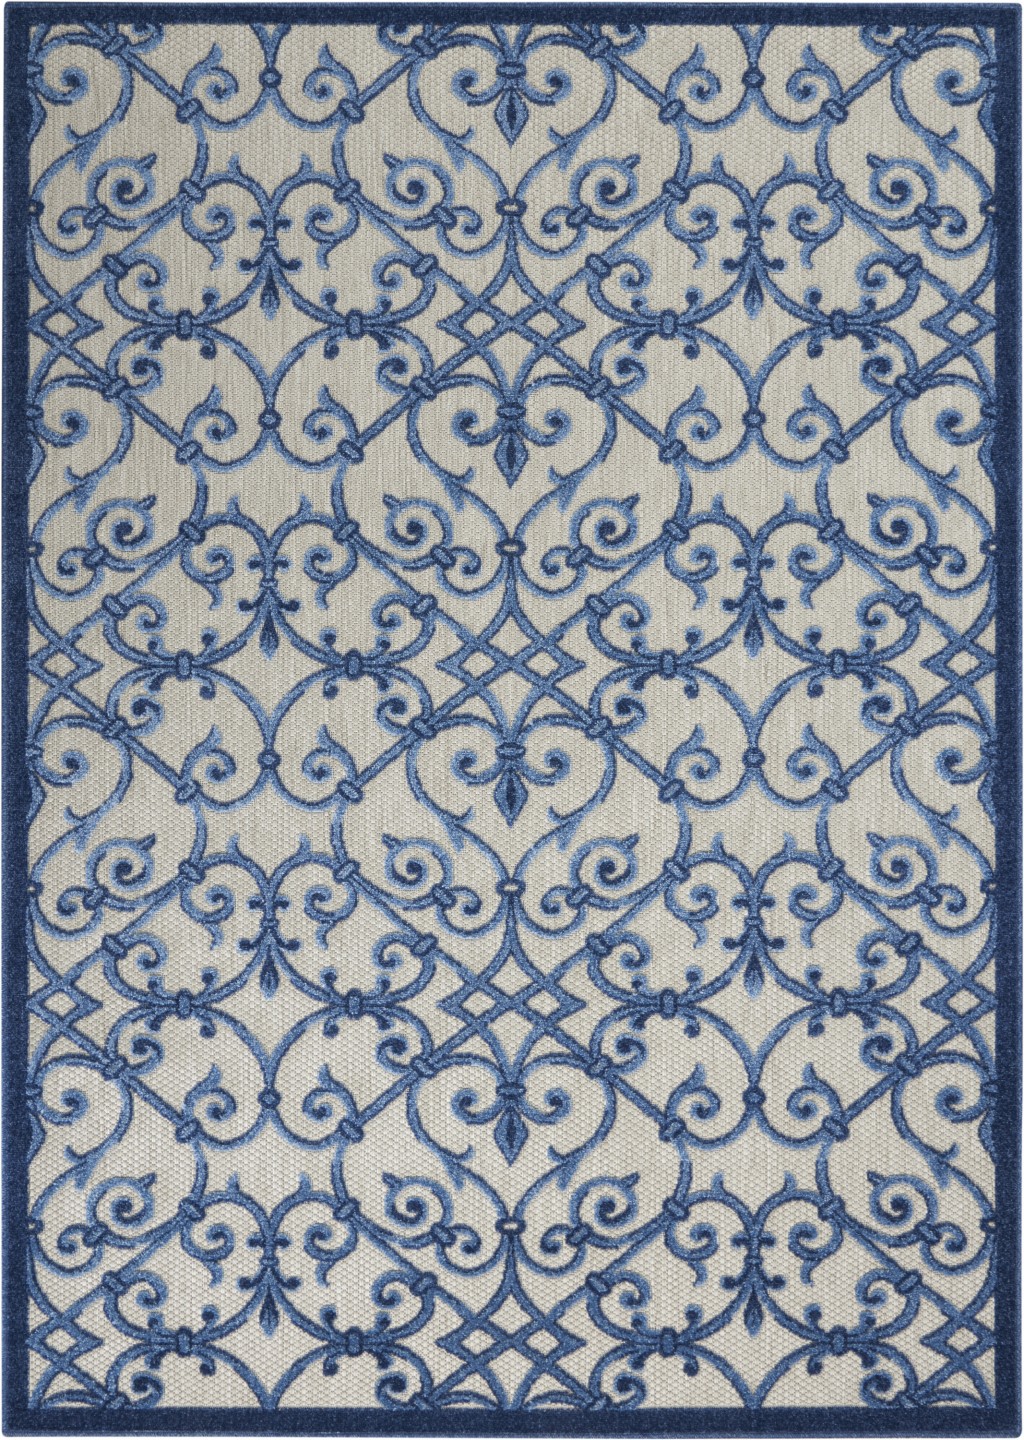 5' X 8' Blue And Gray Floral Indoor Outdoor Area Rug-385008-1